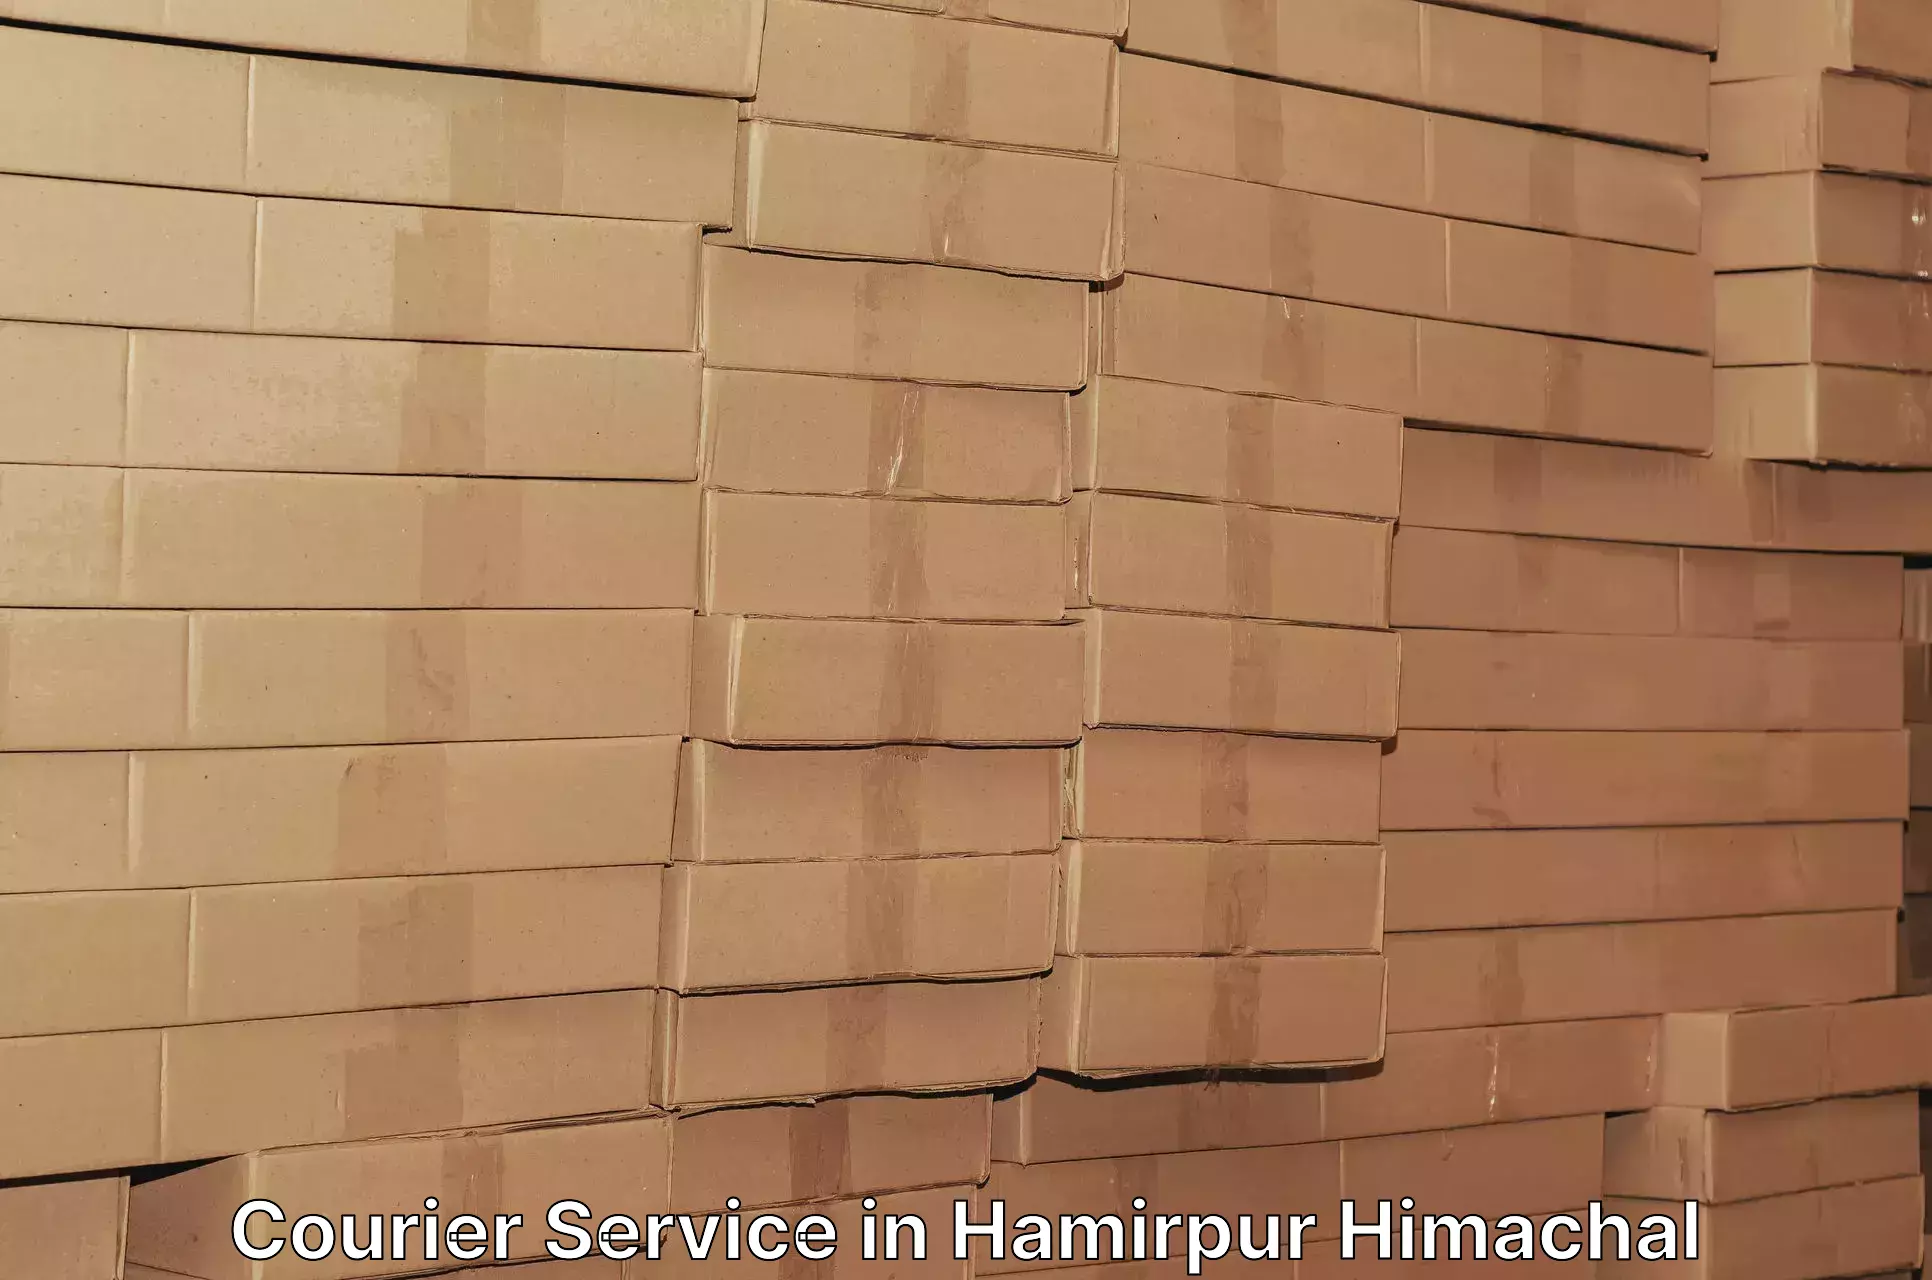 Express mail solutions in Hamirpur Himachal